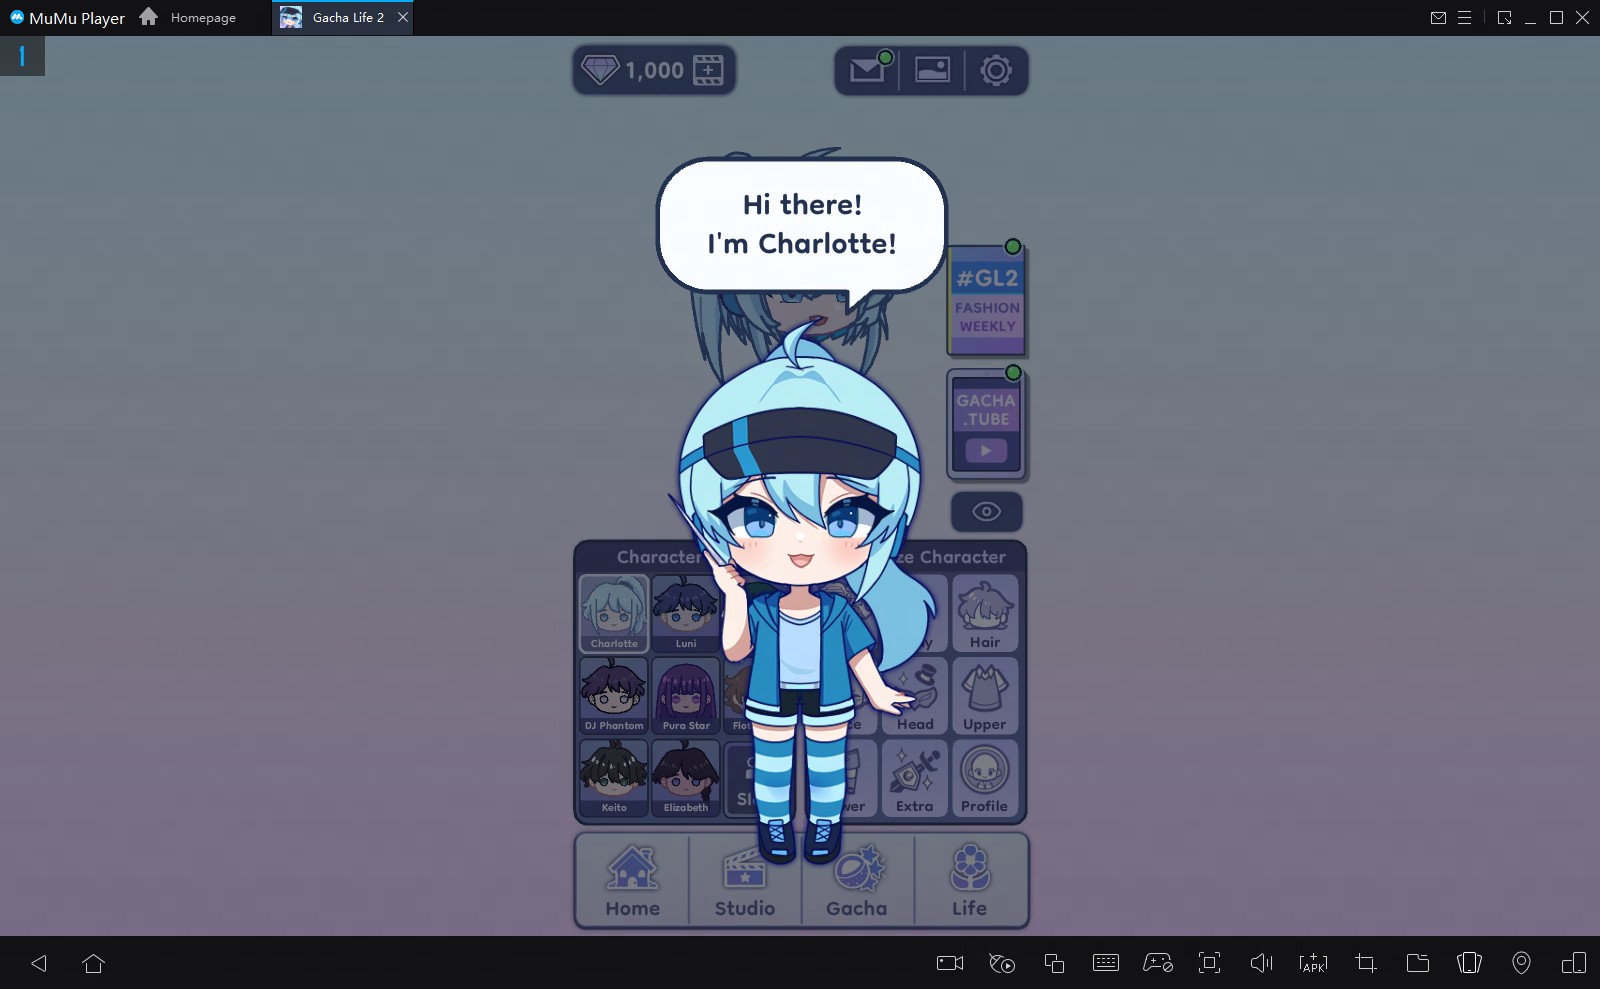 Dress them Up to the Best with Gacha Life 2 Beginner Guide and Get  Started-Game Guides-LDPlayer